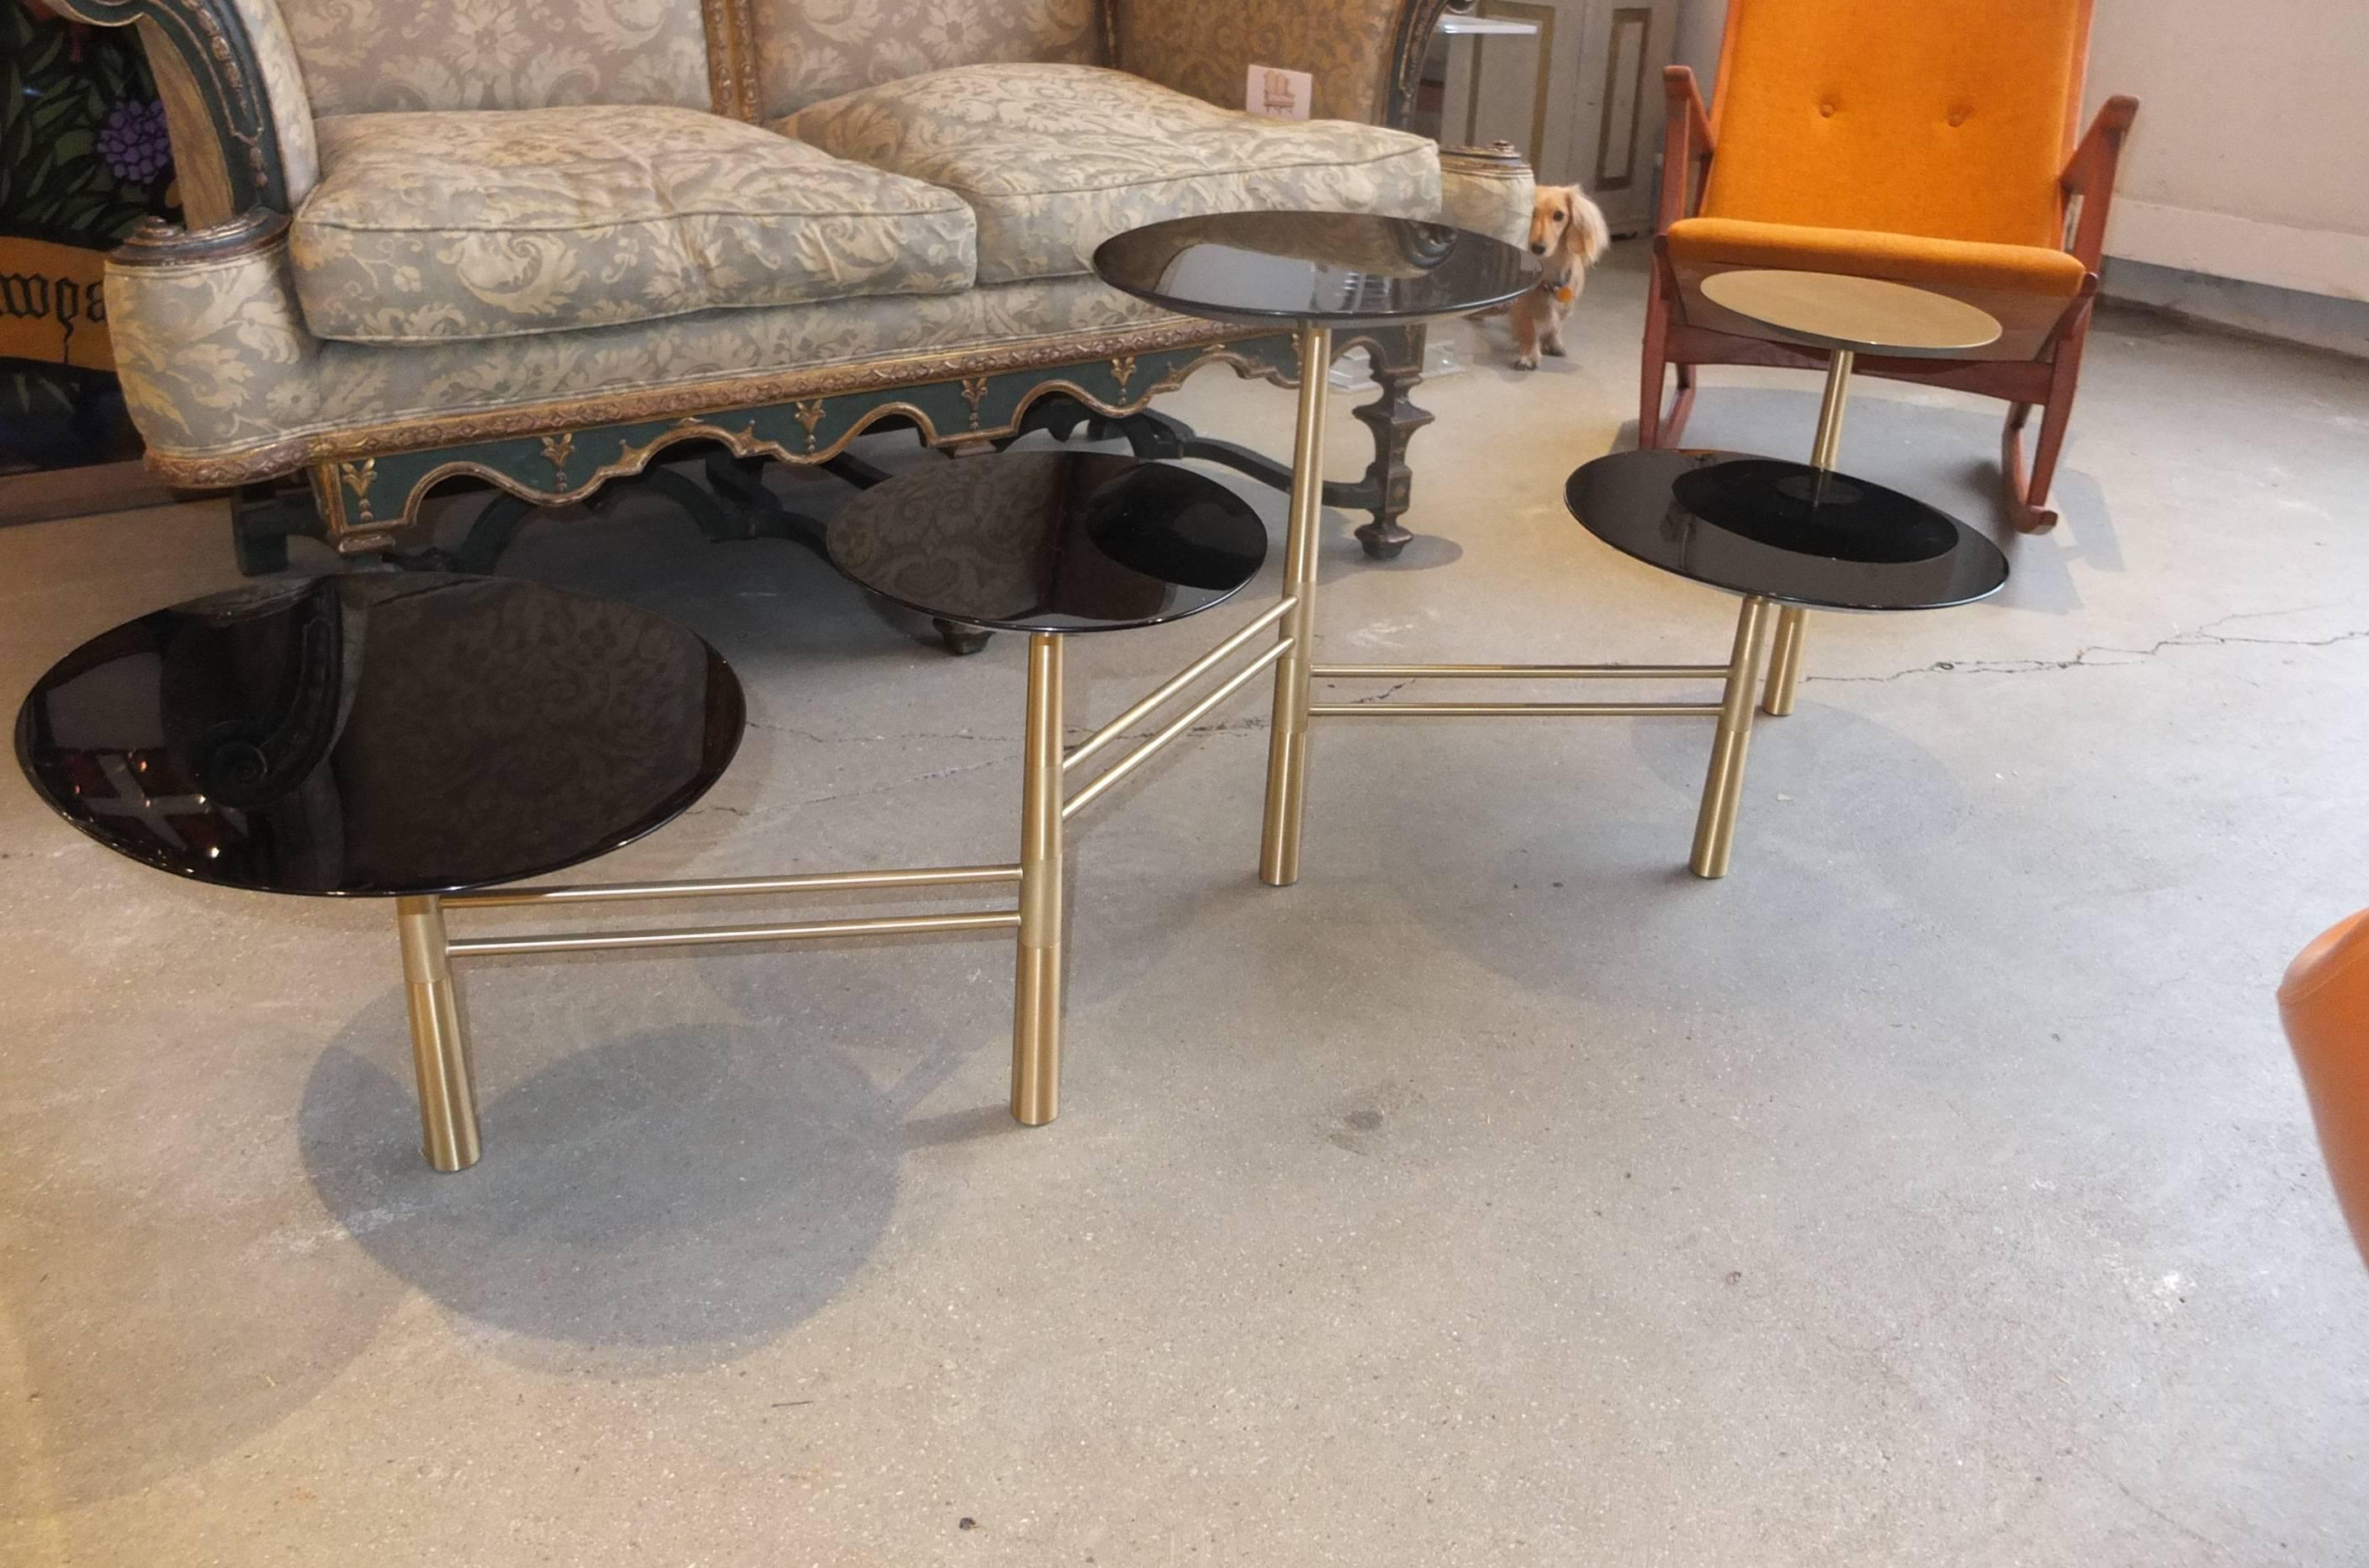 The pebble table by Nada Debs. Five top on solid brass base. Four black lacquer pebble tops and one brass. Signed by the artist.

Just installed in BG Galleries' market stall in the Boston Design Center, this particular table is available for